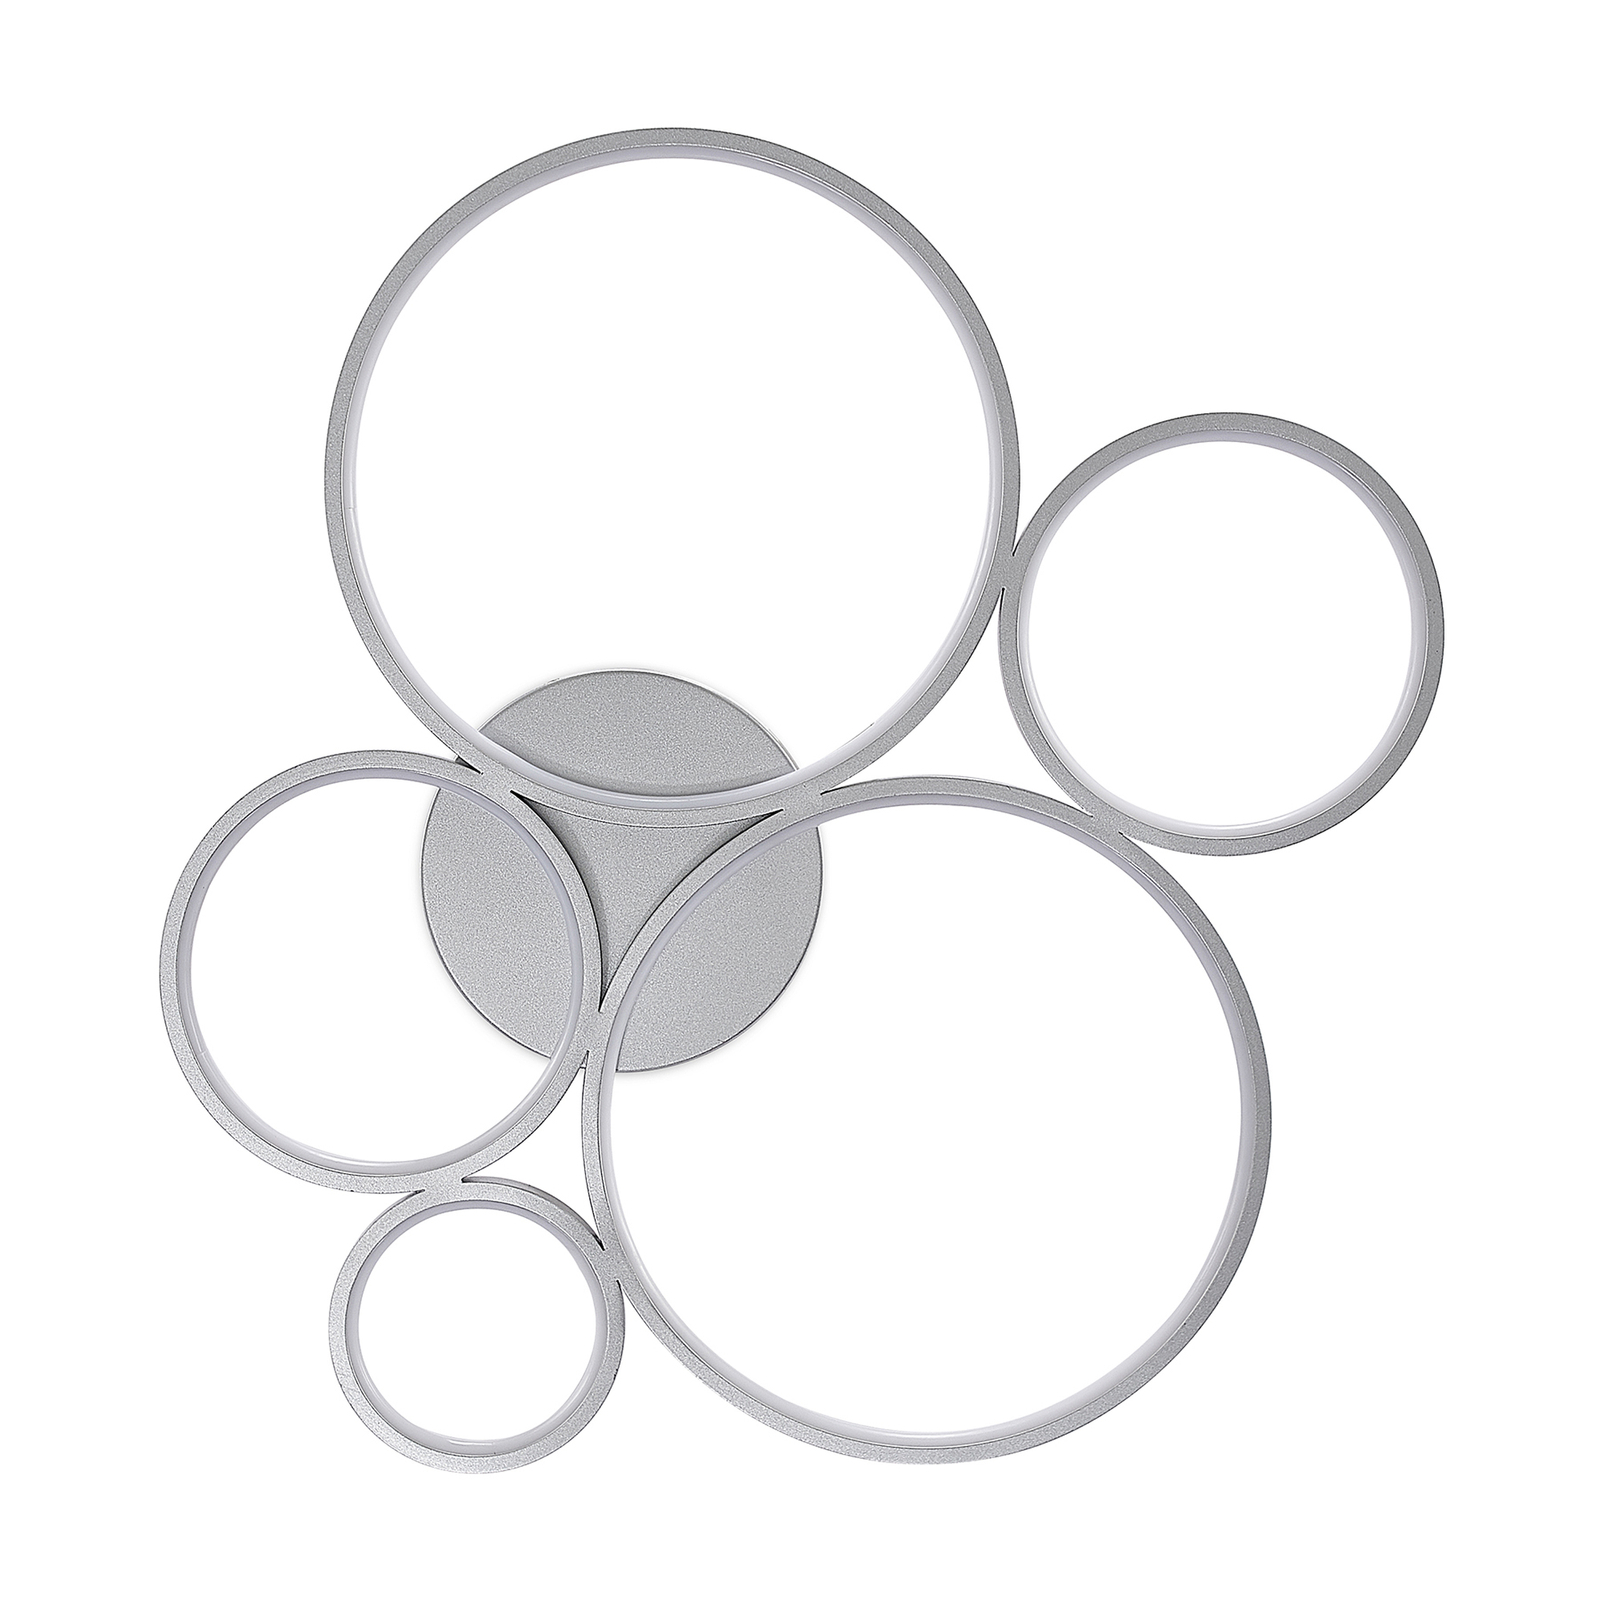 Lindby Jorven LED ceiling lamp, 5 circles dimmable